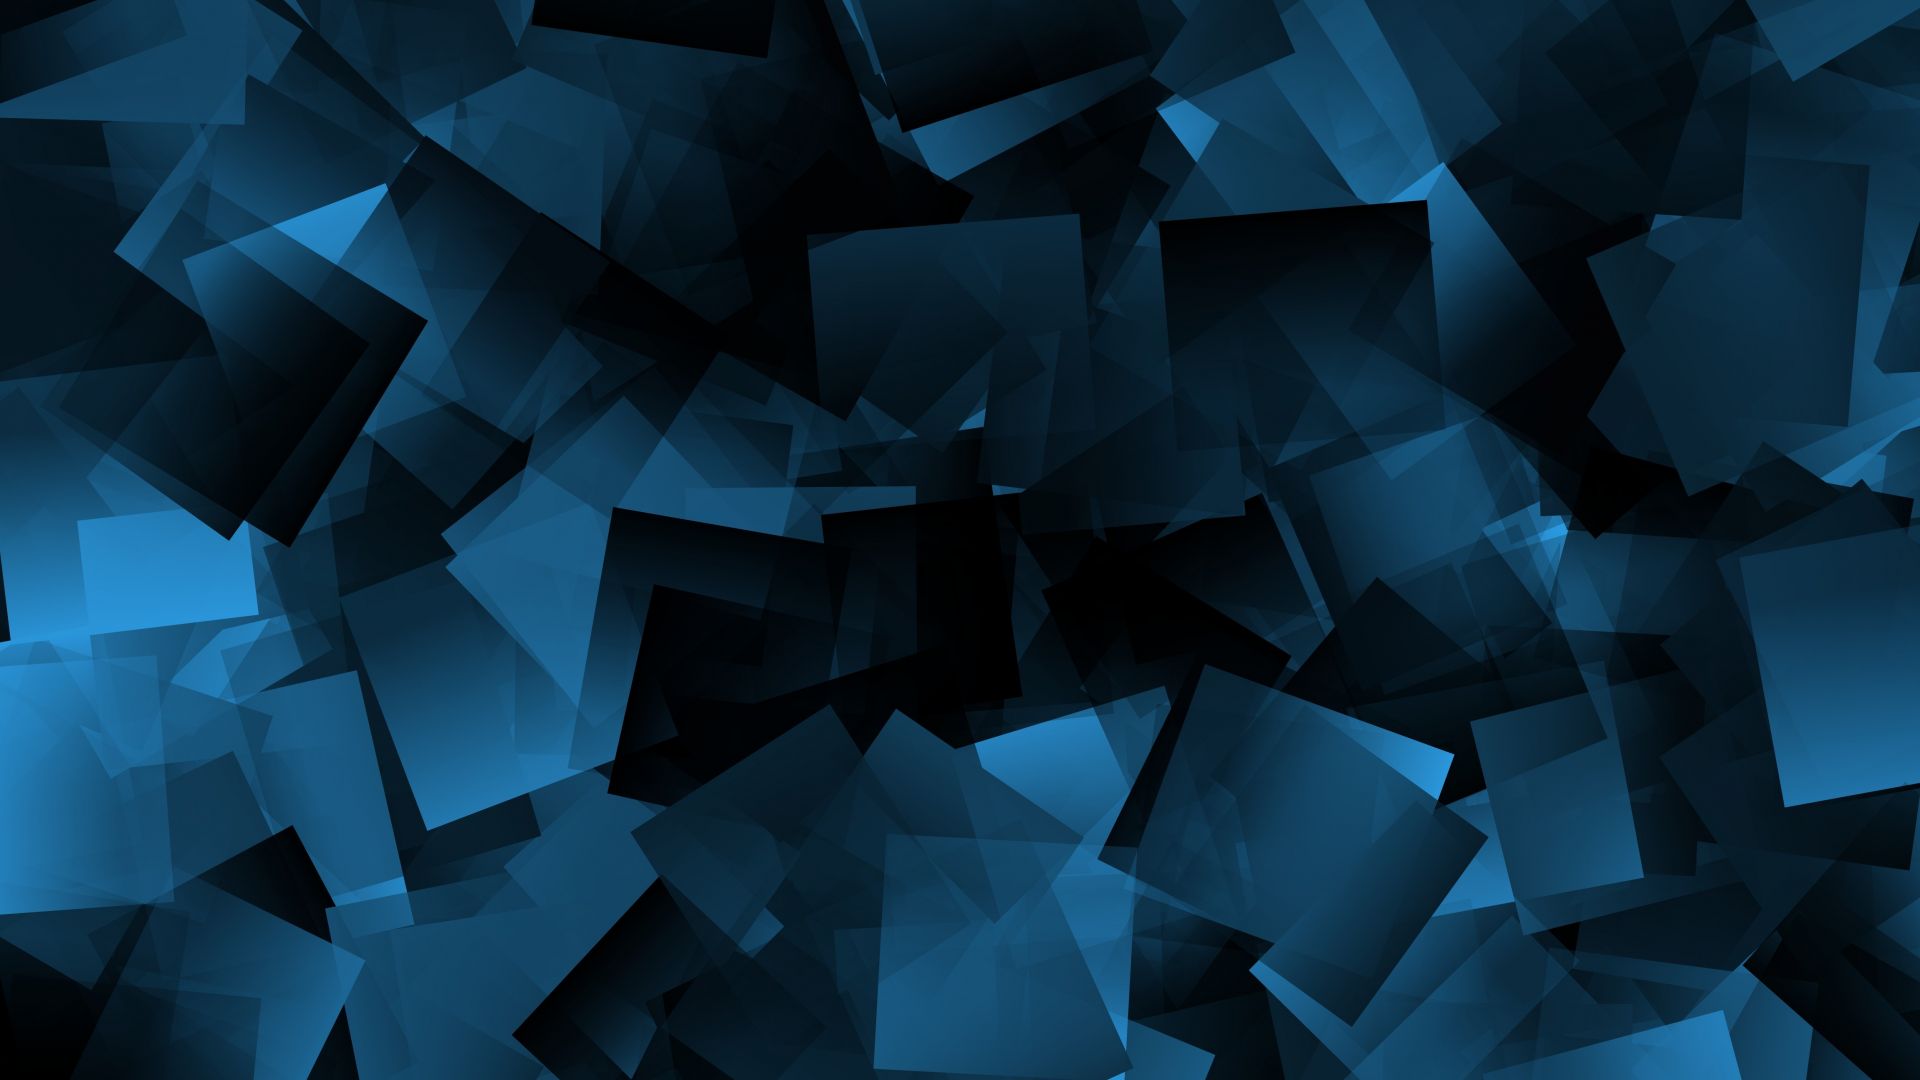 Wallpaper Square, cubes, abstract, dark